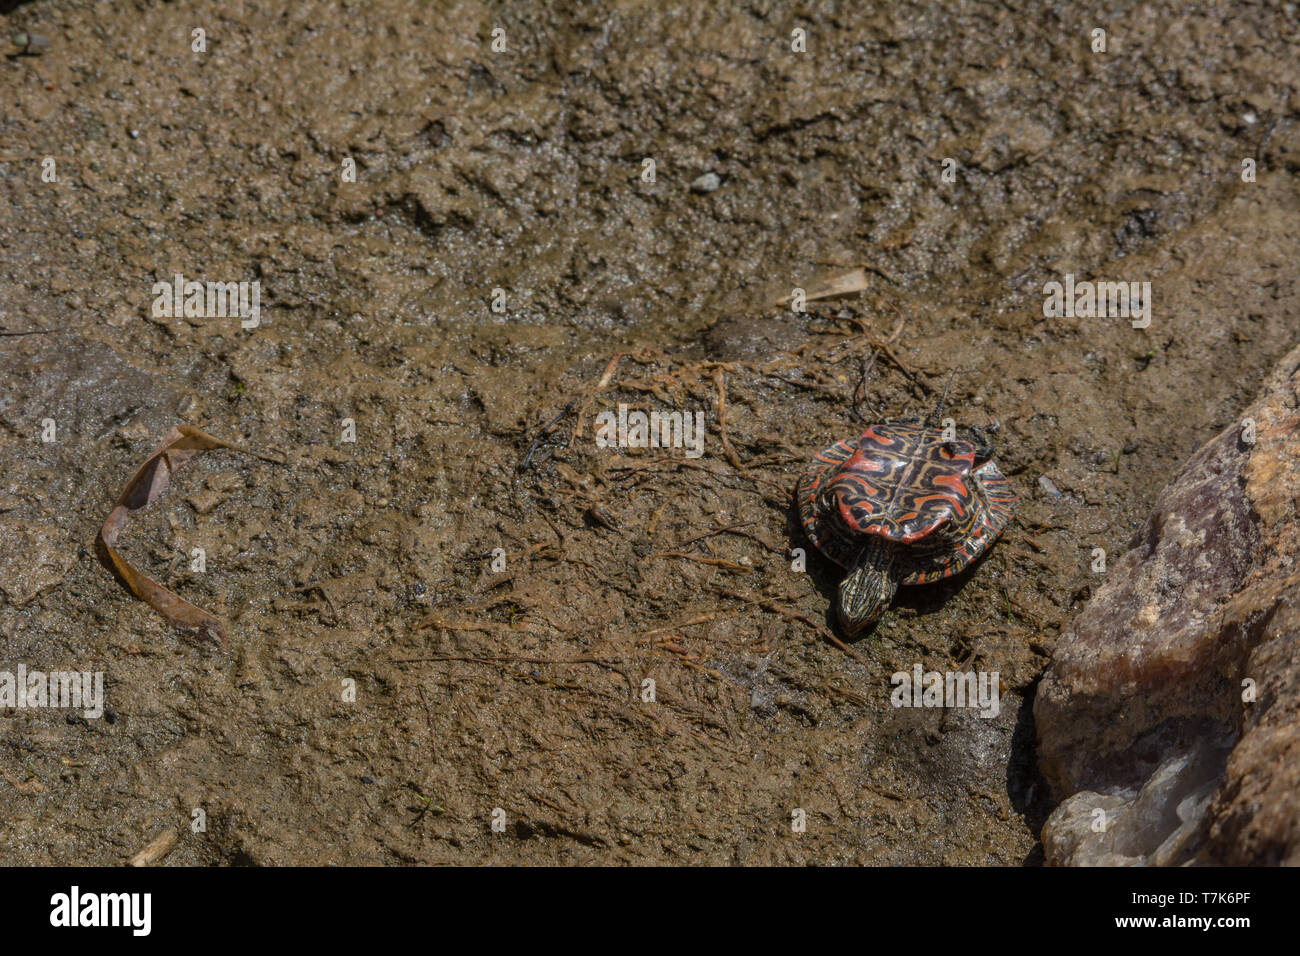 A desiccated juvenile Western Painted Turtle (Chrysemys picta belli) from Jefferson County, Colorado, USA. Stock Photo